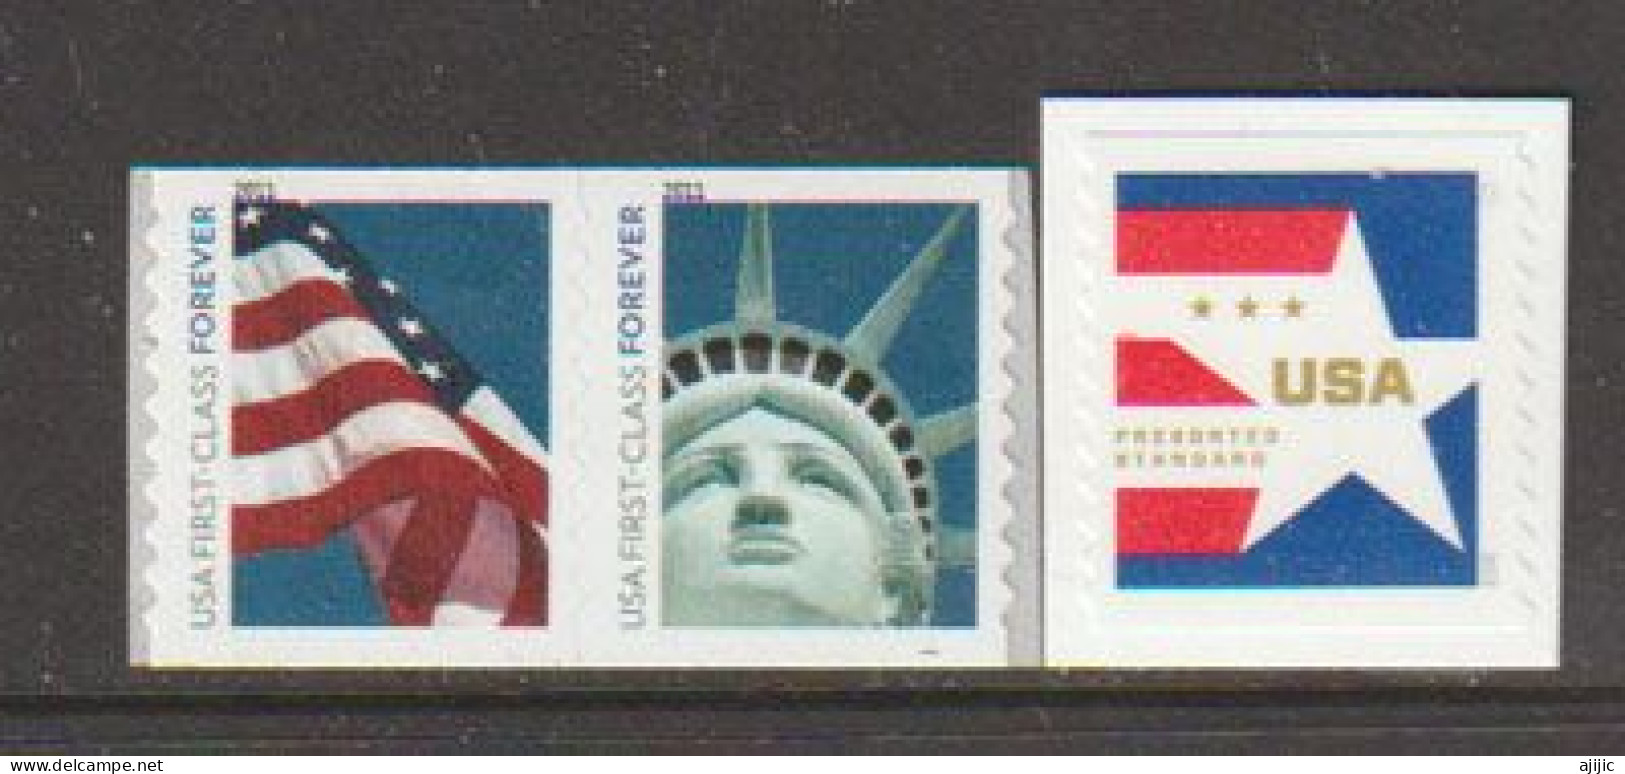 Flags USA (Star-Spangled Banner ) 3  Timbres Neufs **  (First Class Forever Stamps) - Unused Stamps